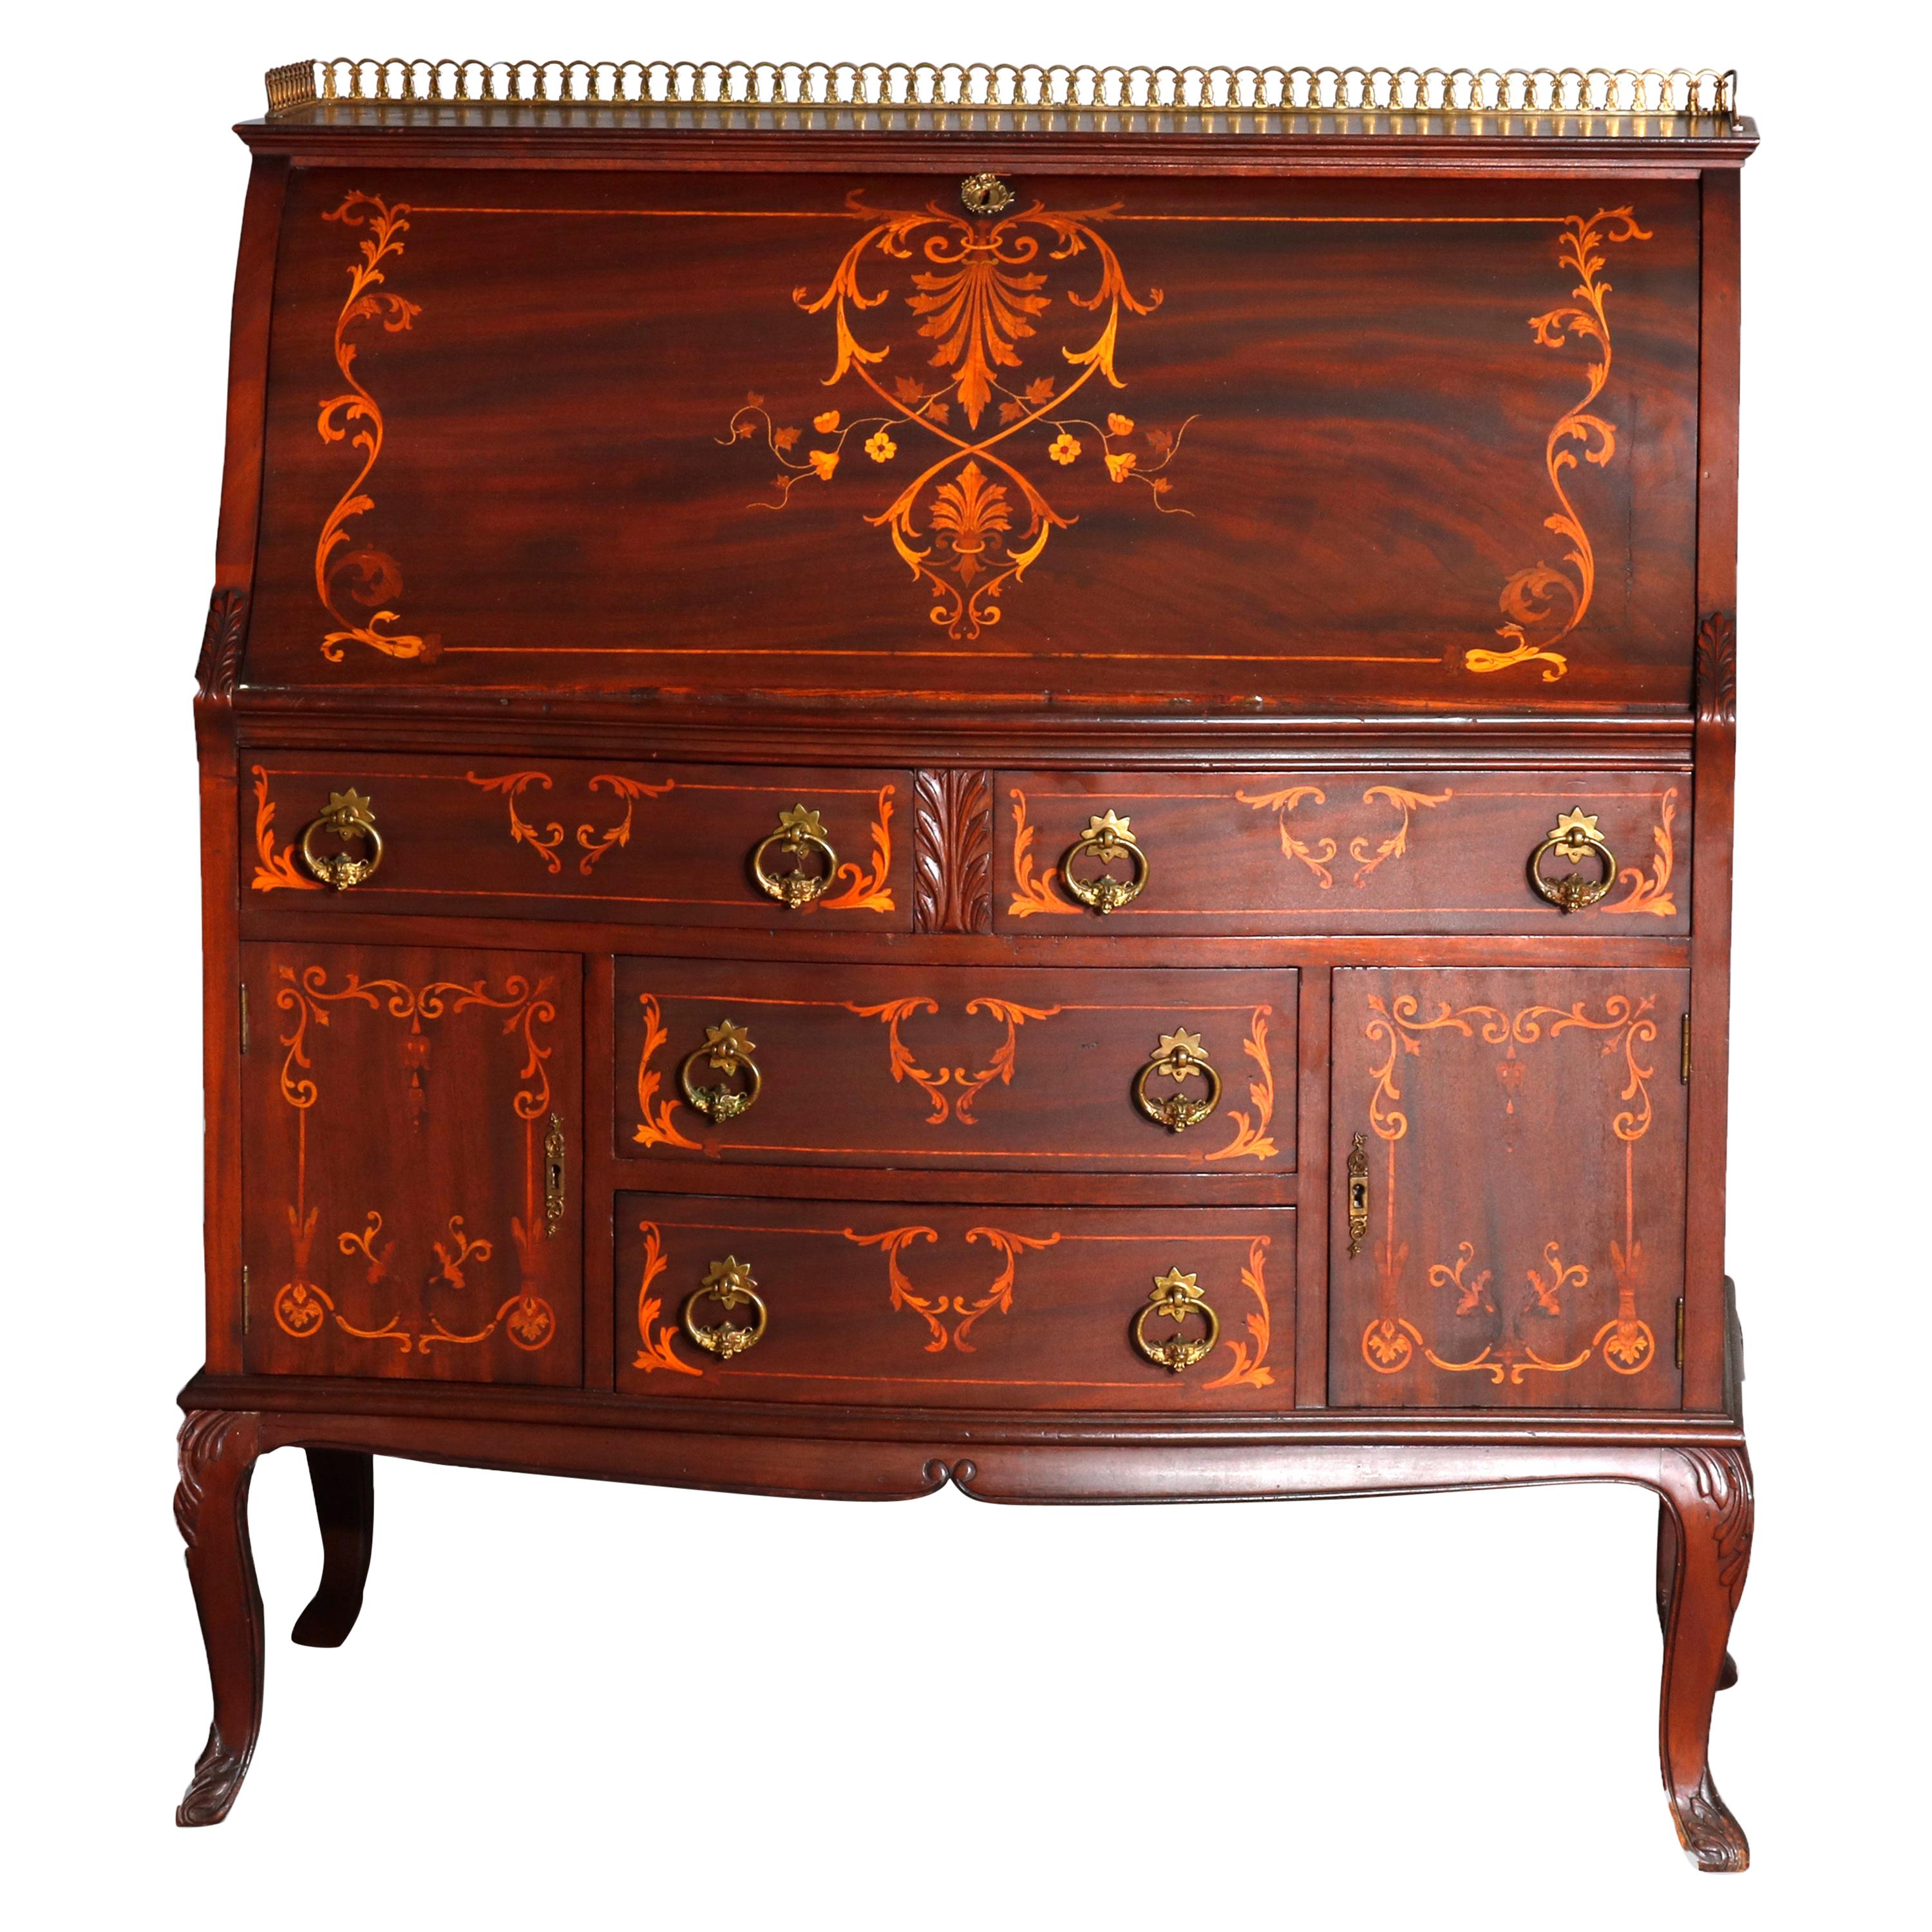 French RJ Horner Style Mahogany and Satinwood Inlaid Drop Front Desk, circa 1900